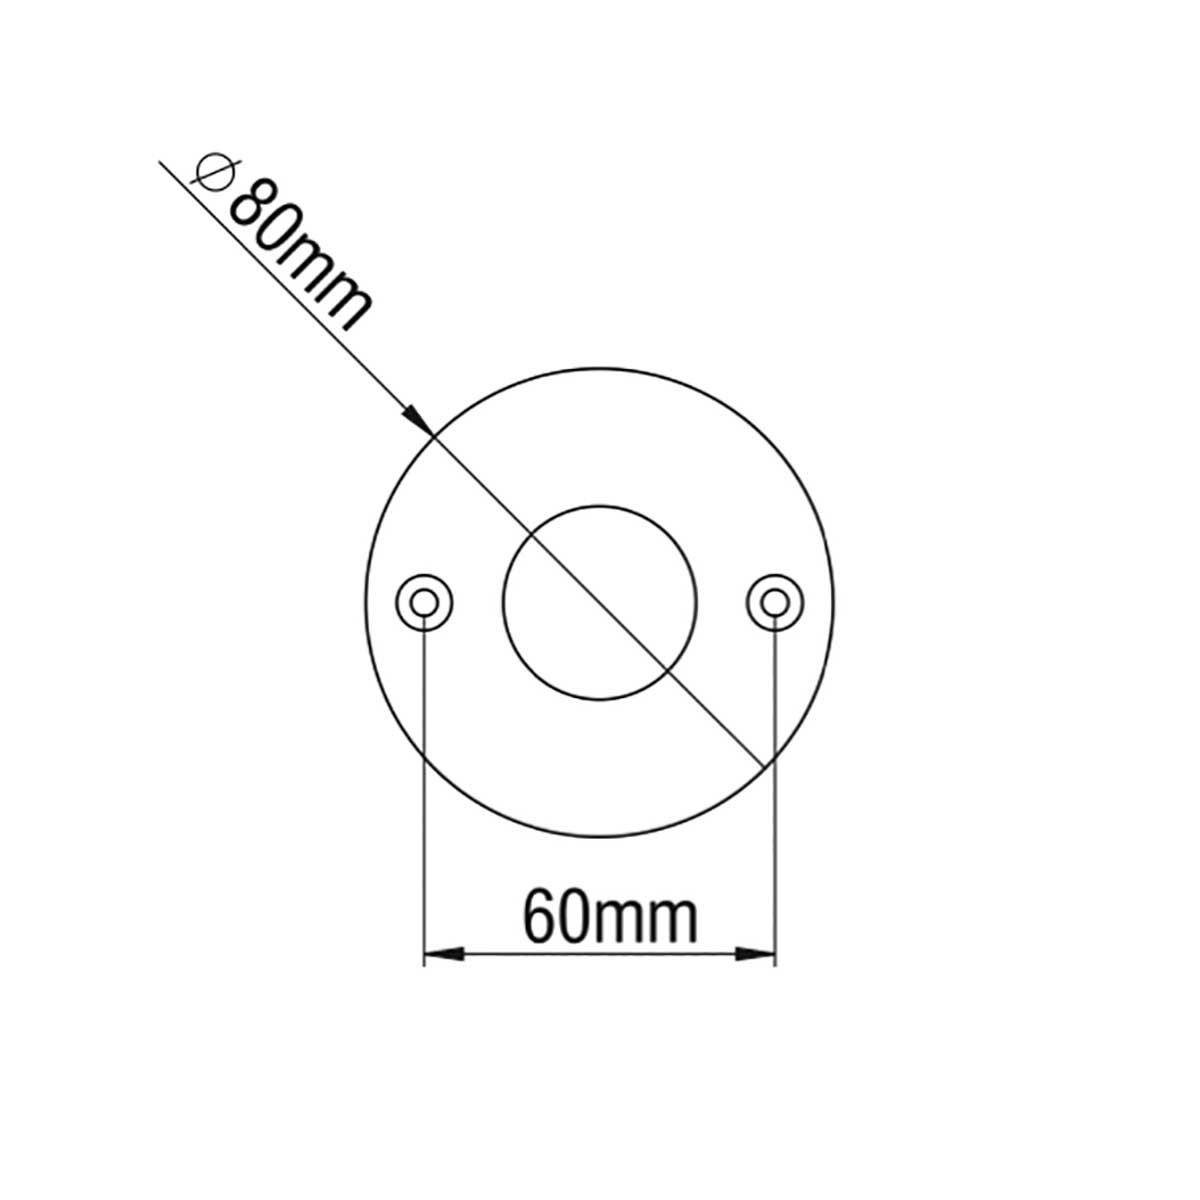  Dimensions /POINT FRAME ROUND 